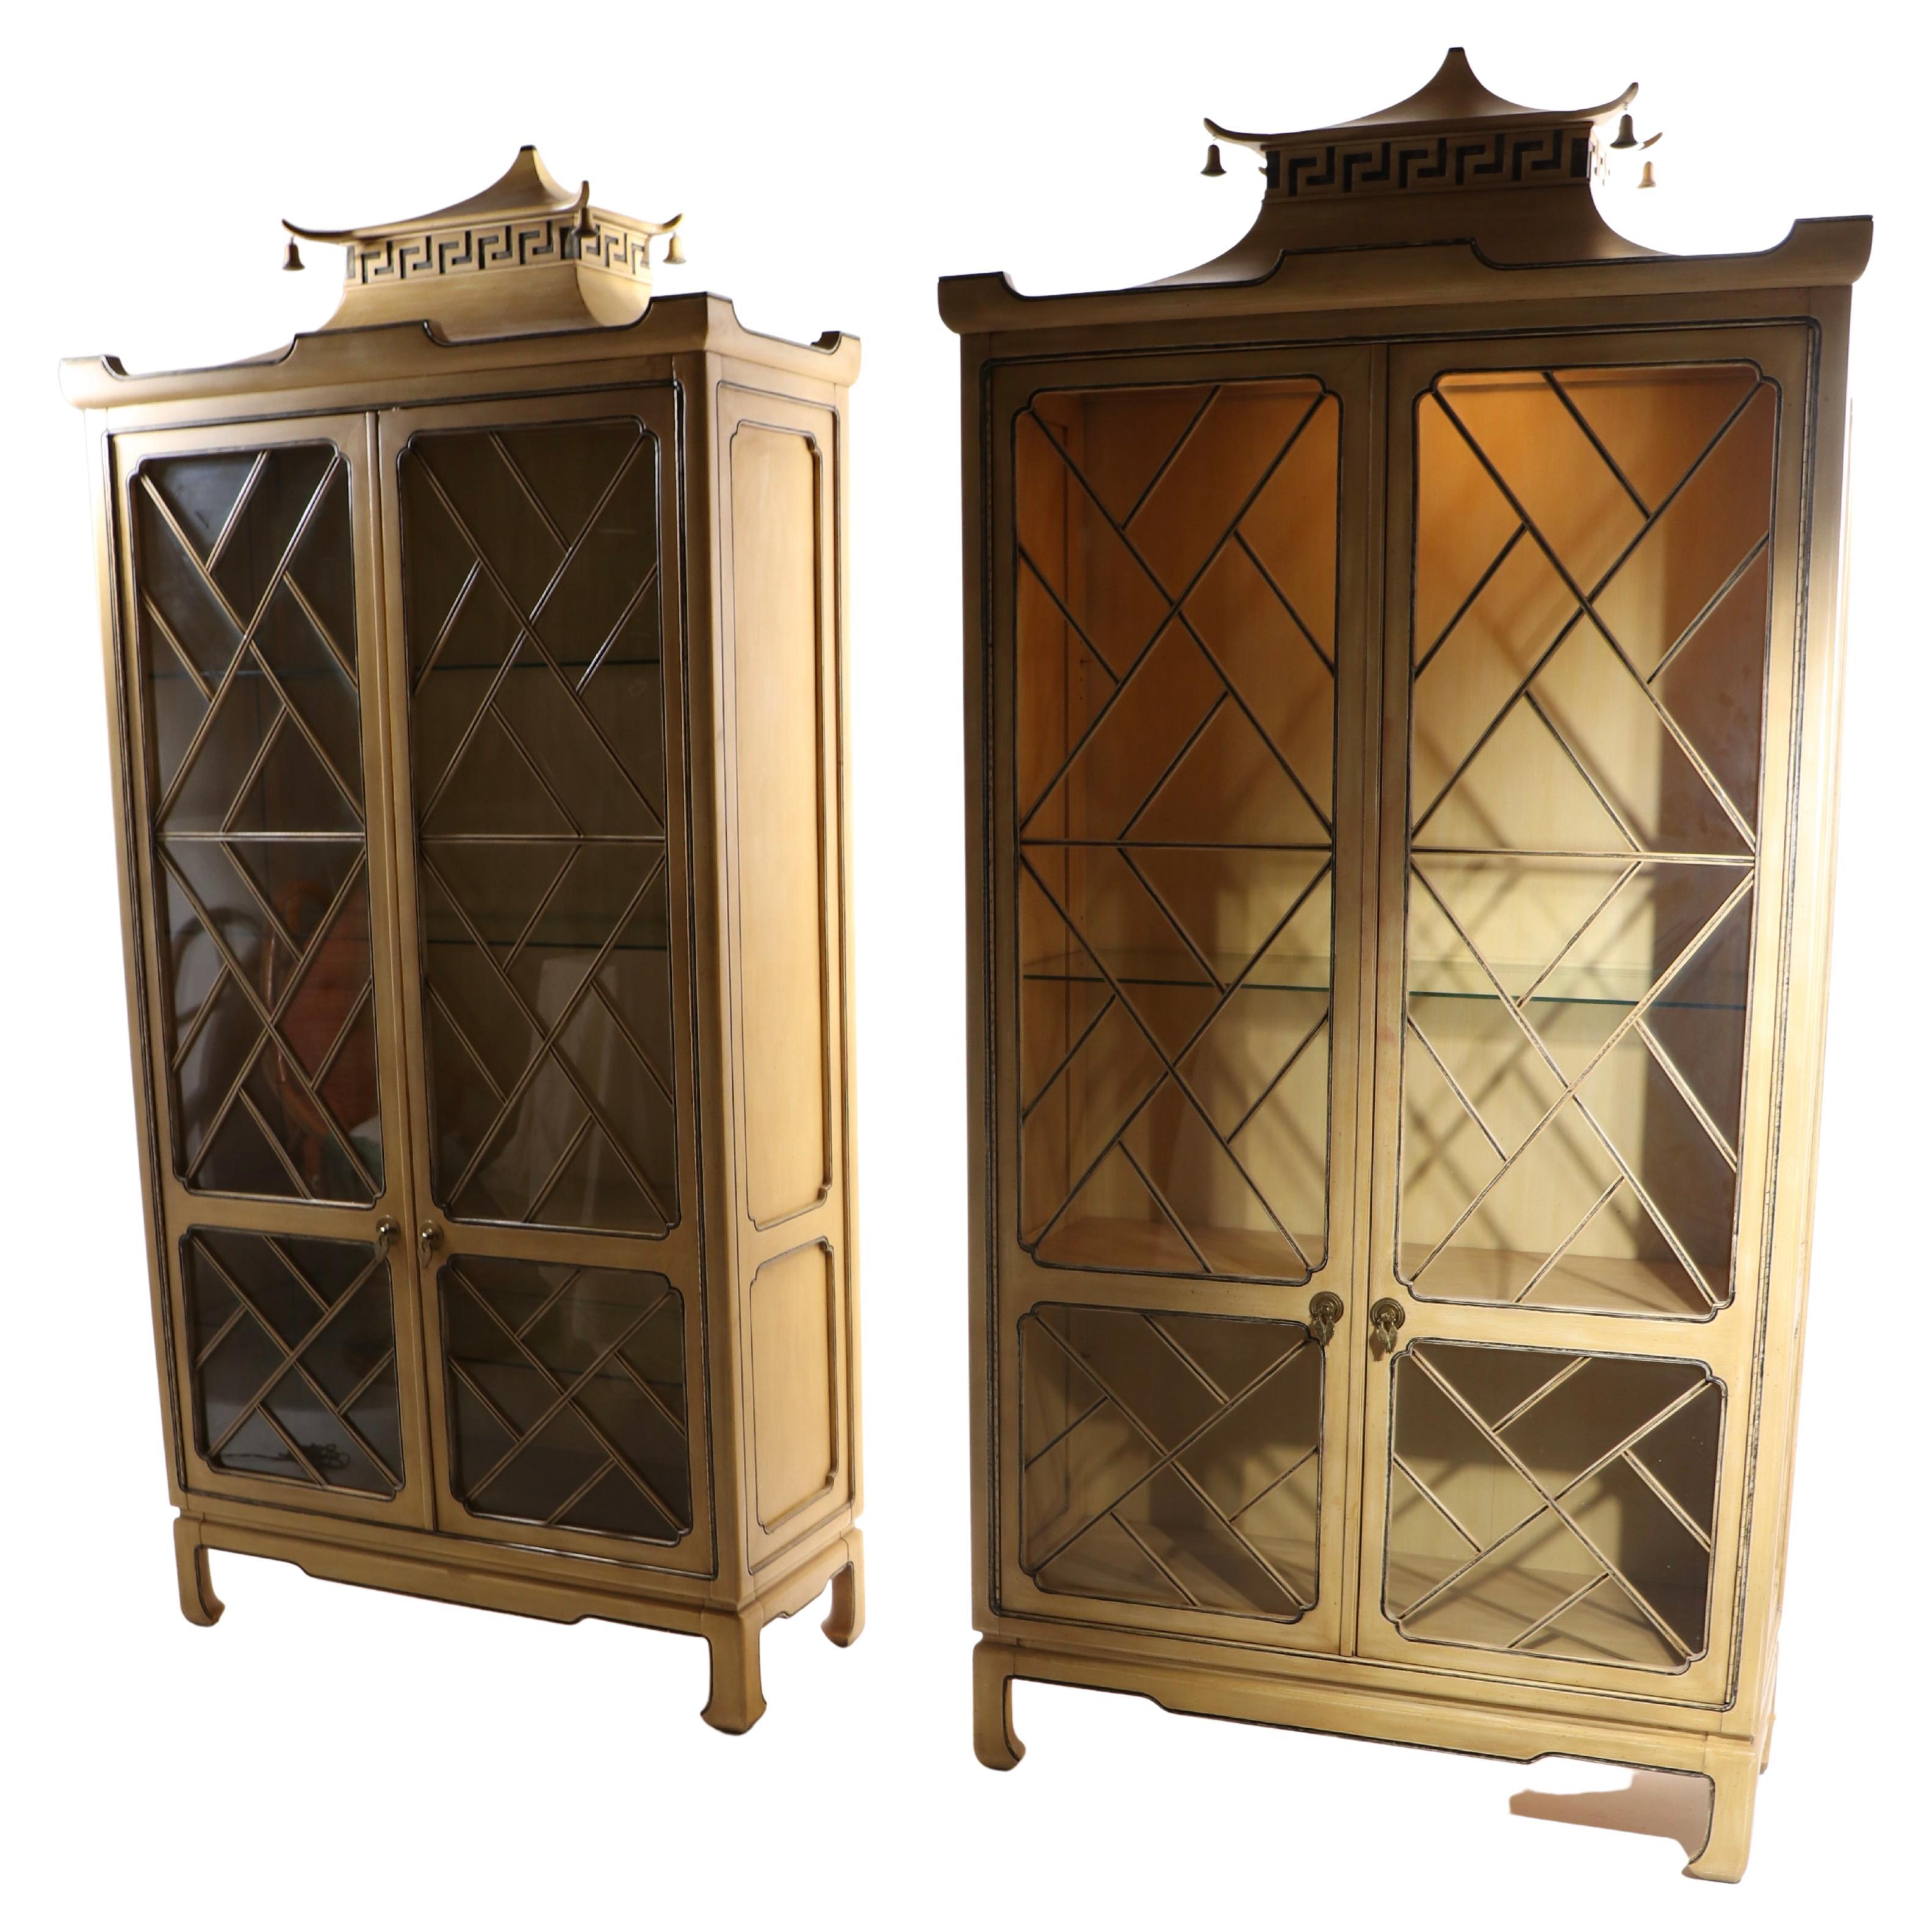 Incredible pair of Tomlinson Pagoda vitrines, in the Chinese Chippendale, Hollywood Regency style. Each cabinet has two swing out door which open to reveal a fixed wood shelf, and adjustable glass shelves, and an interior light at the top. The cases